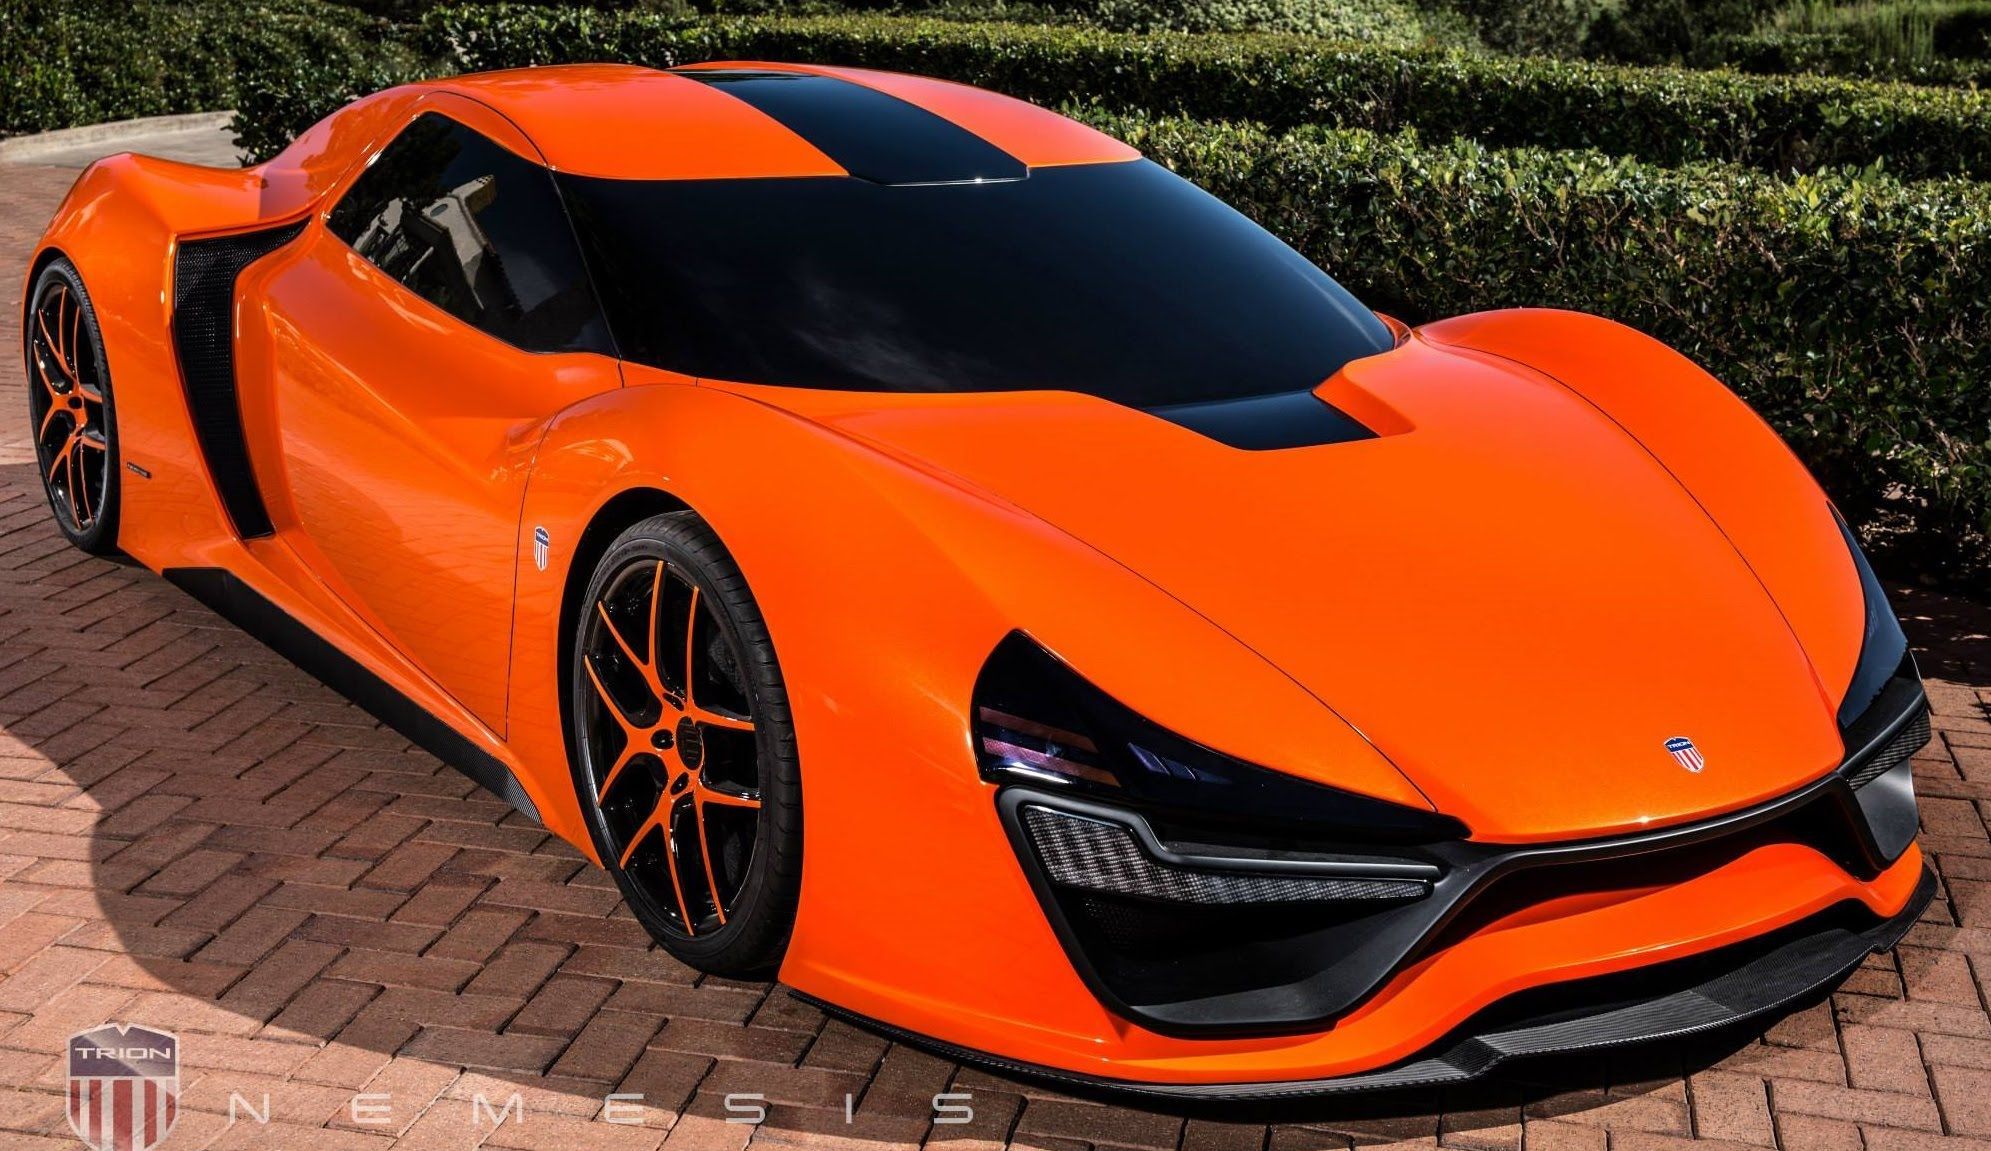 SUPERCARS YOU NEVER KNEW EXISTED ▷2. Trion, Super cars, Sports cars luxury